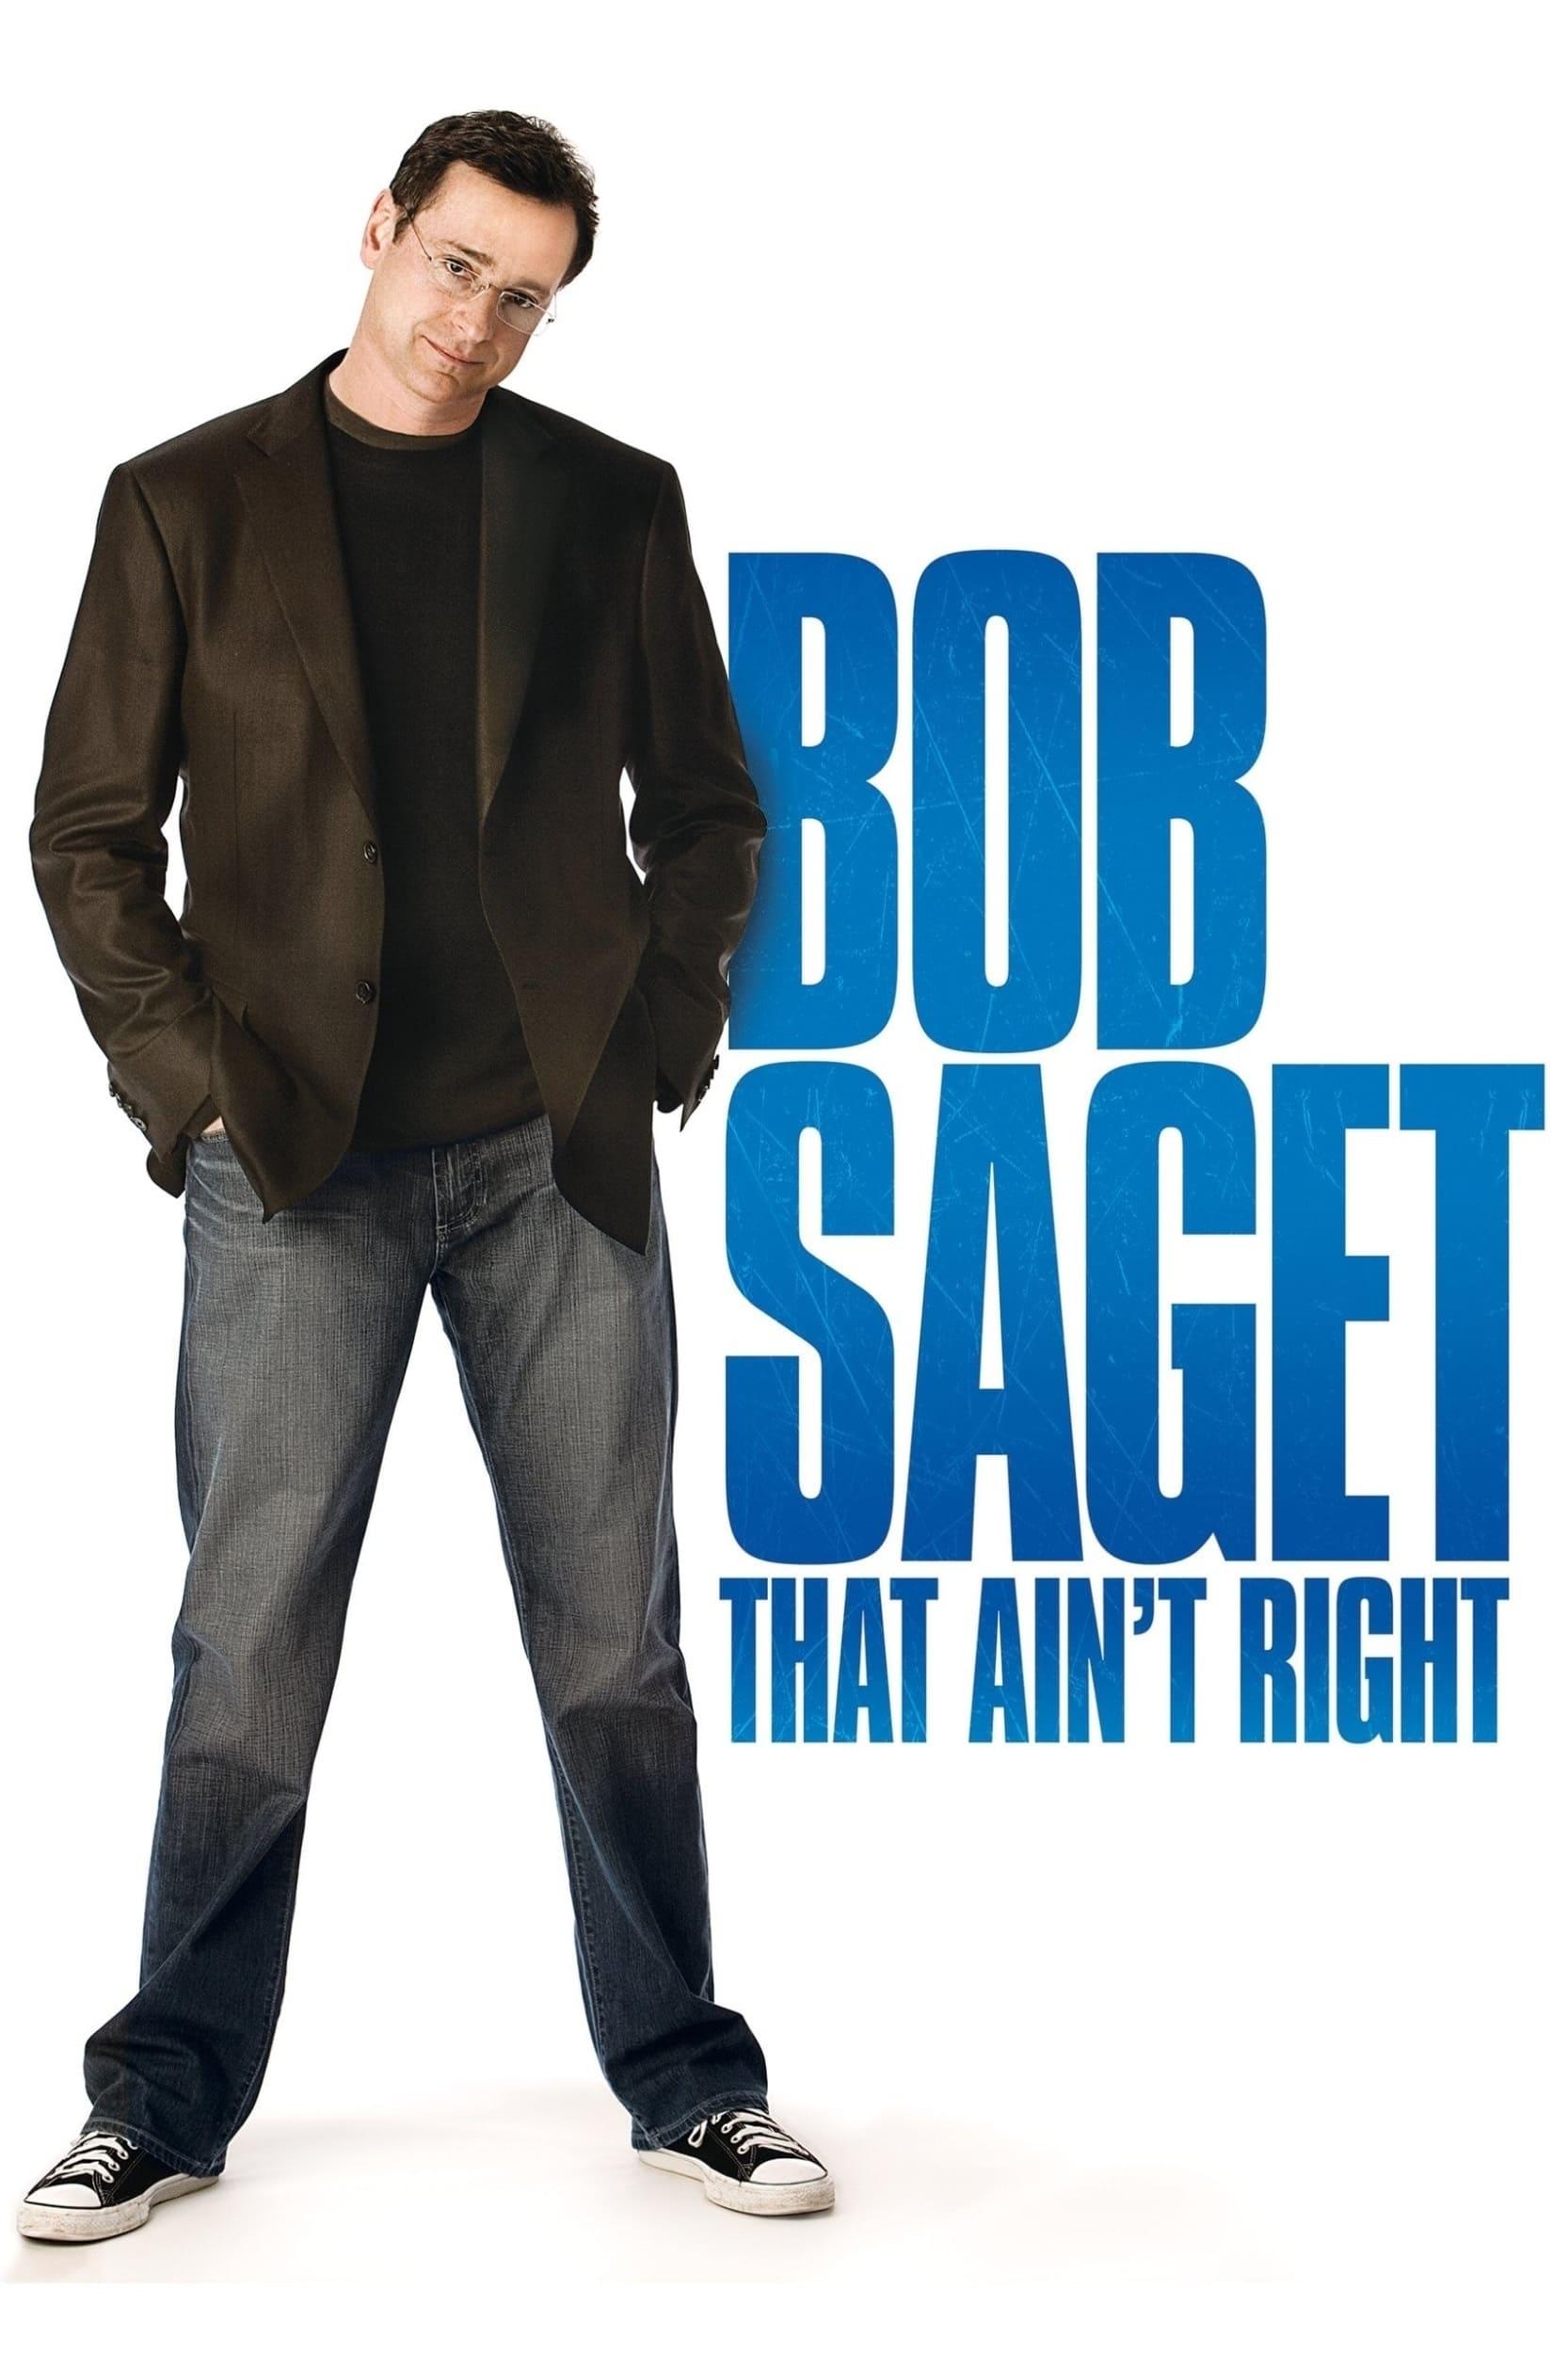 Bob Saget: That Ain't Right poster